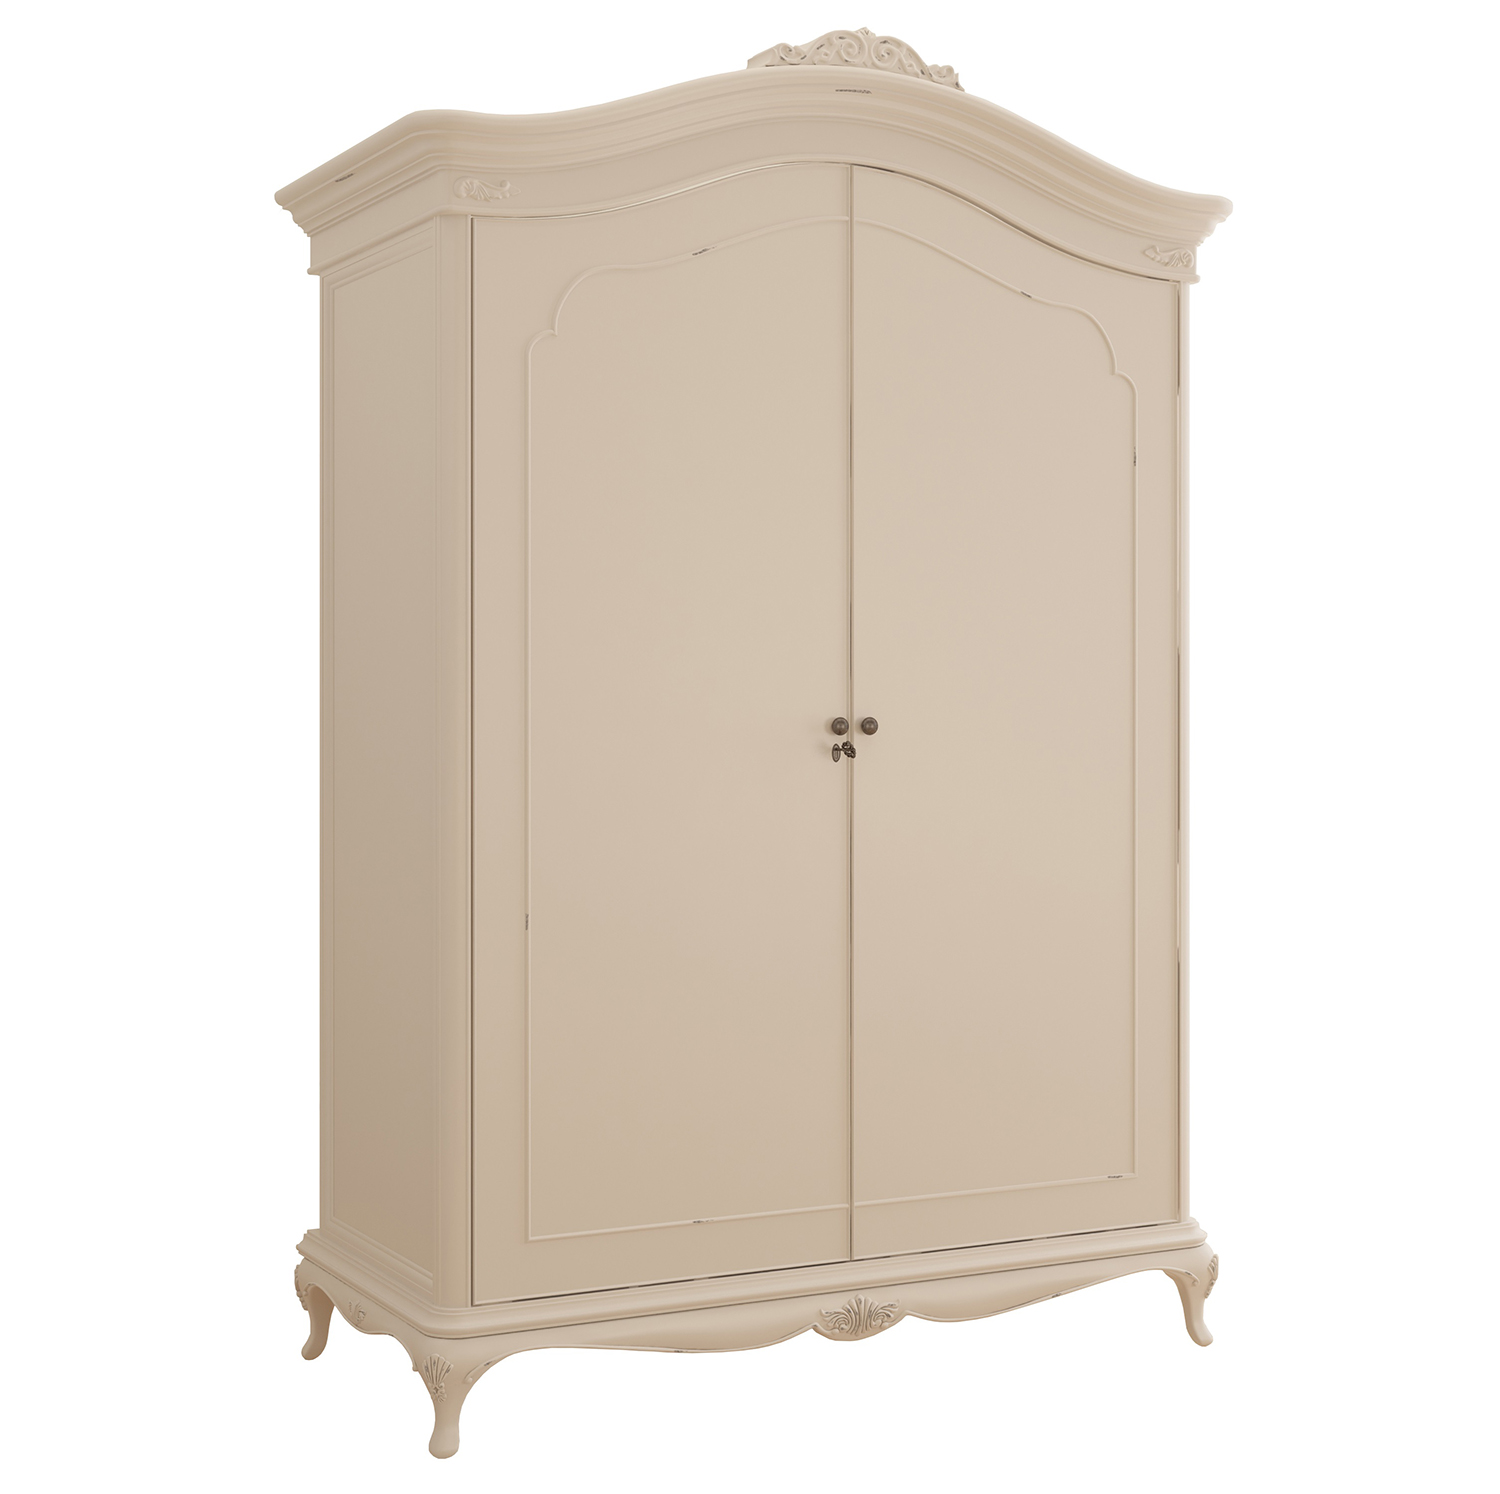 Willis & Gambier Ivory Wide Fitted Wardrobe